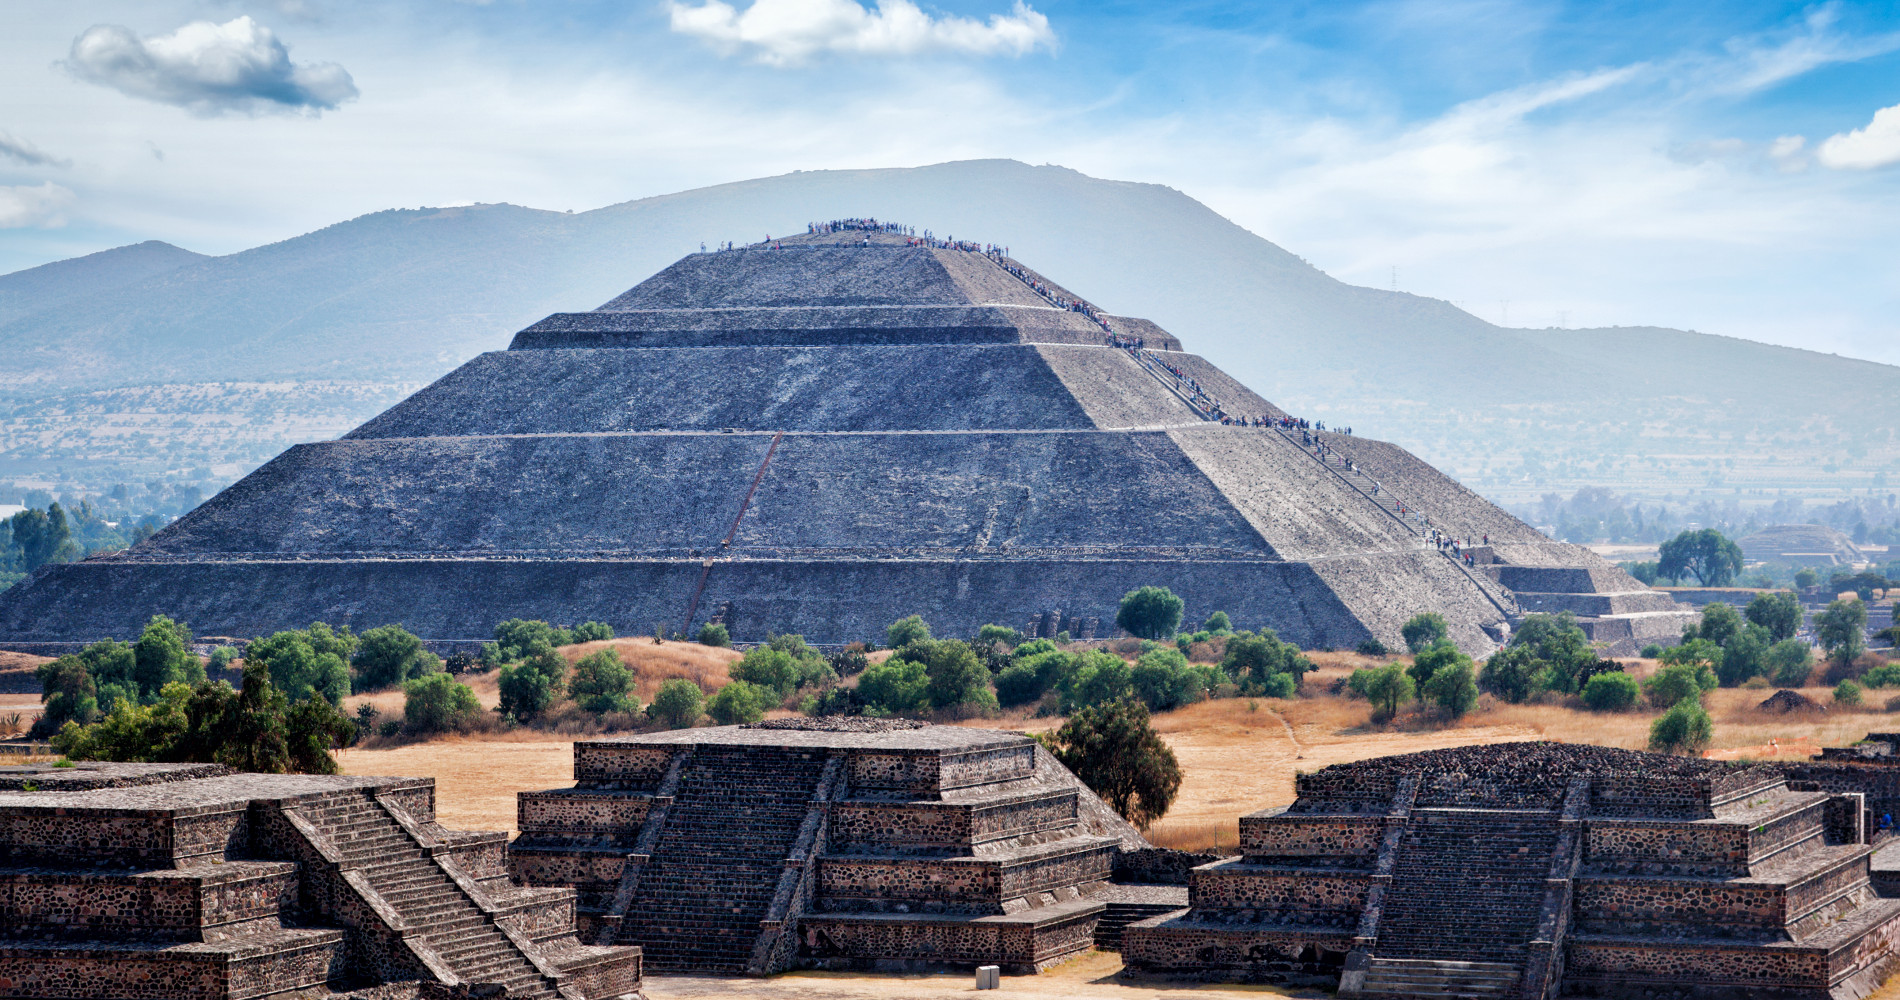 The ancient pyramids of Teotihuacan